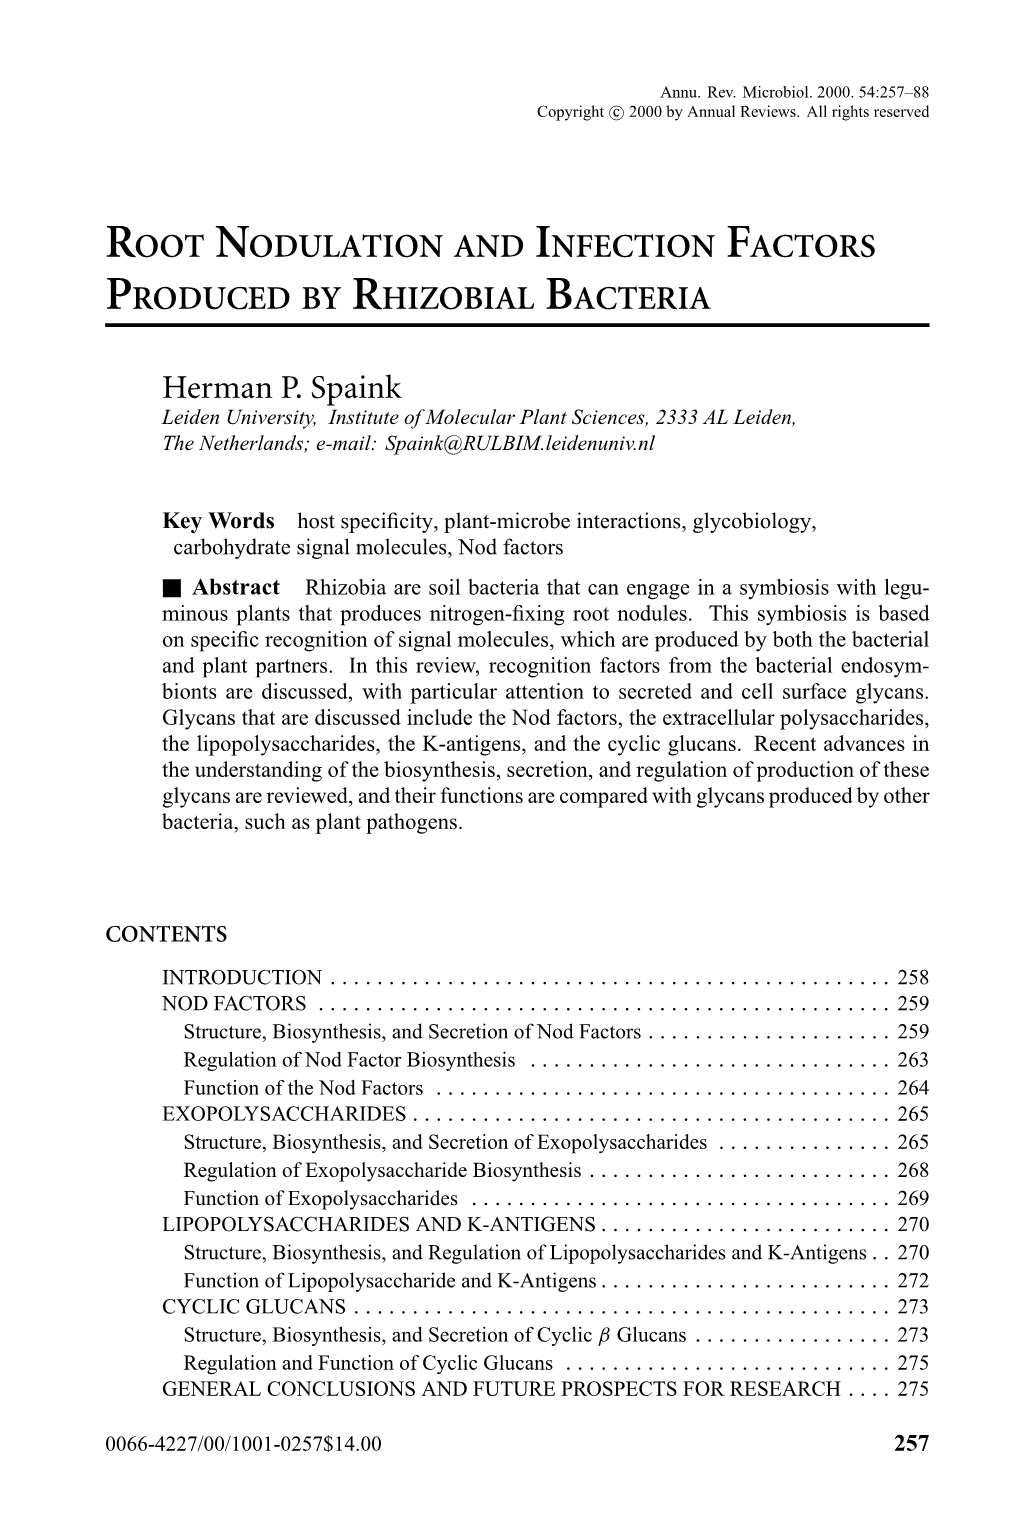 Root Nodulation and Infection Factors Produced by Rhizobial Bacteria